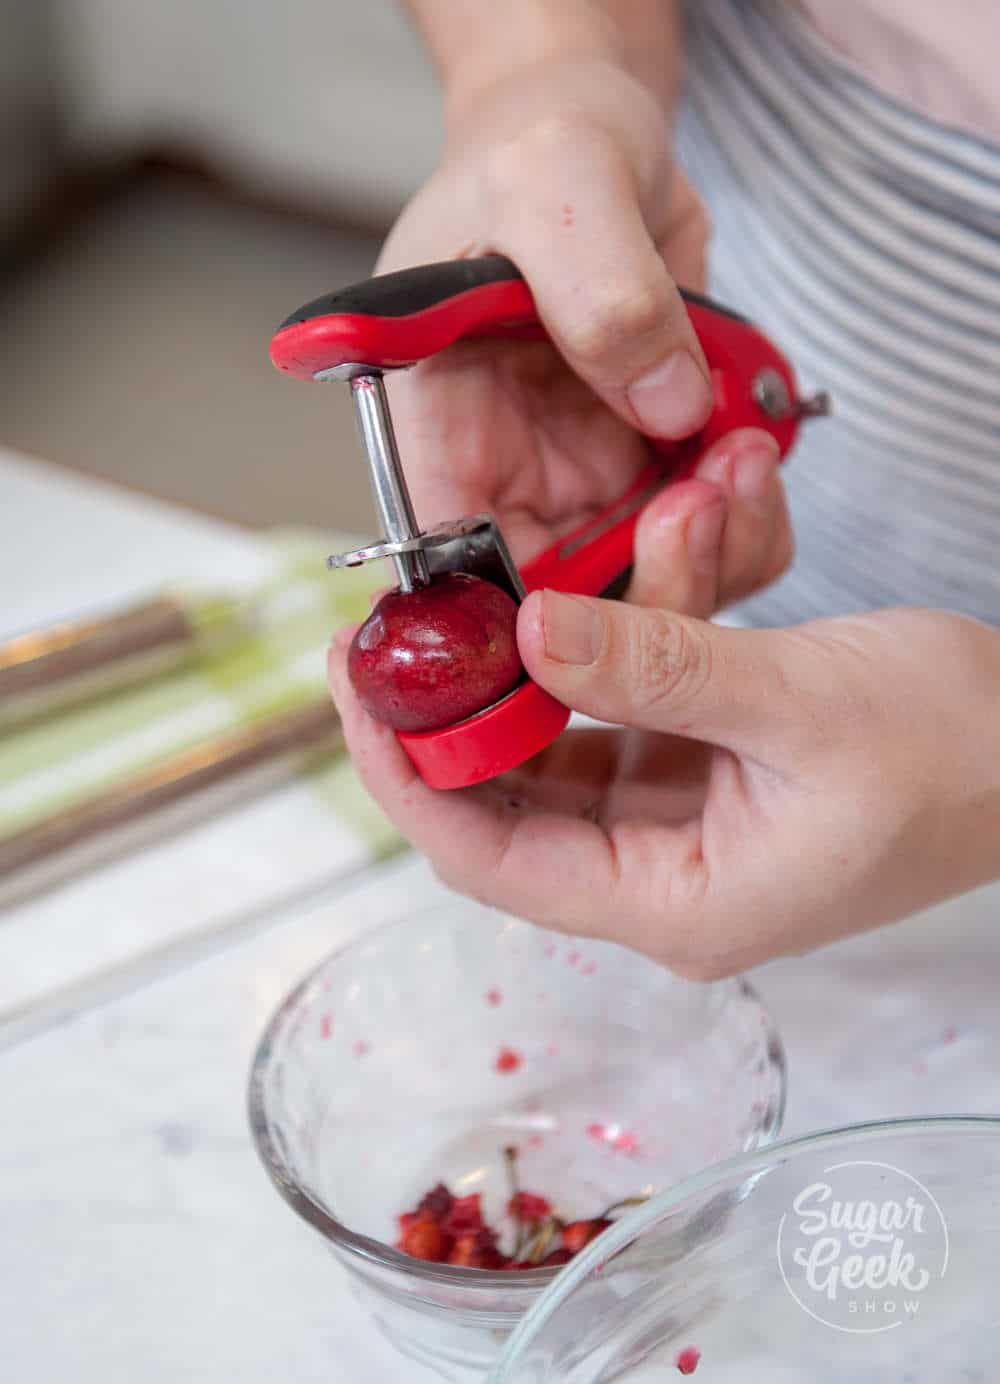 Using a cherry pitter to remove pits from cherries